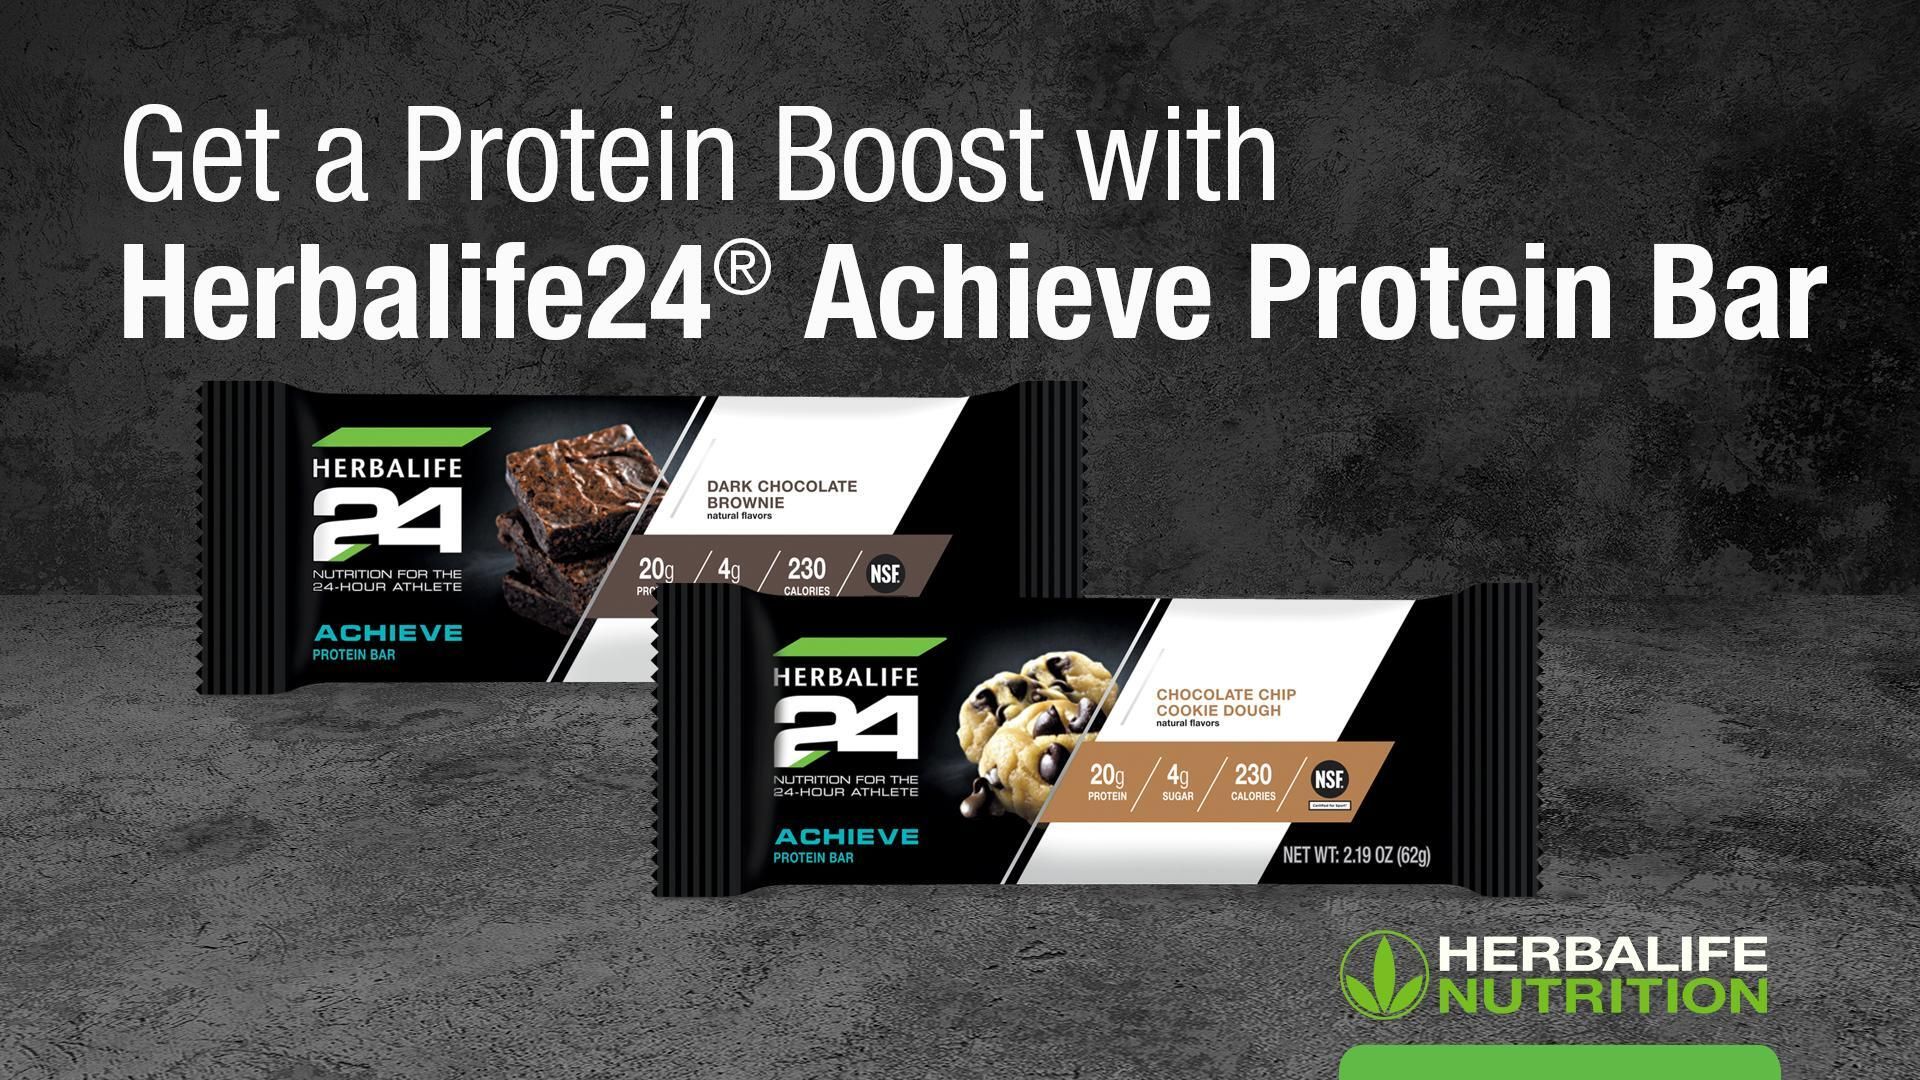 Herbalife24®  Achieve: Know the Products